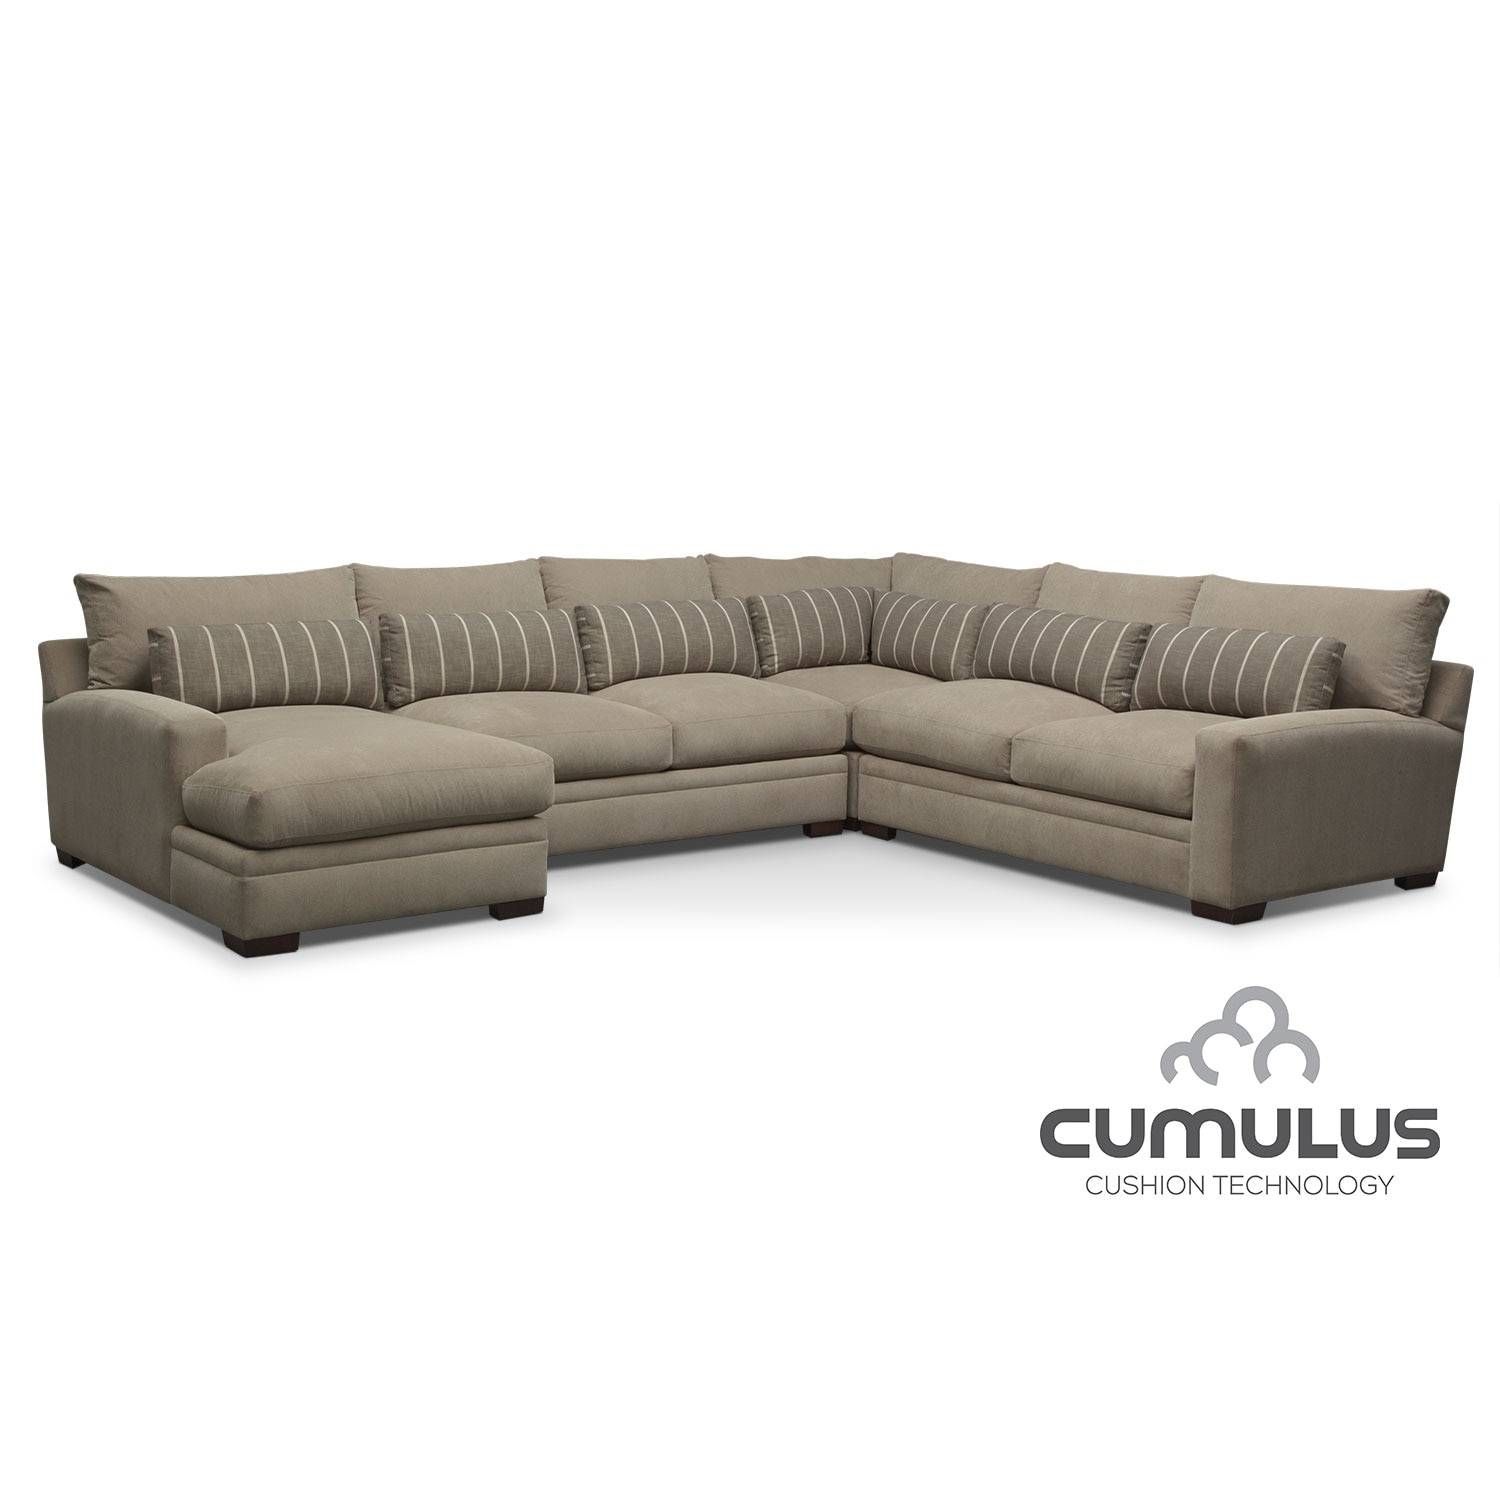 Ventura 2 Piece Right Facing Sectional – Buff | American Signature For 6 Piece Modular Sectional Sofa (View 23 of 30)